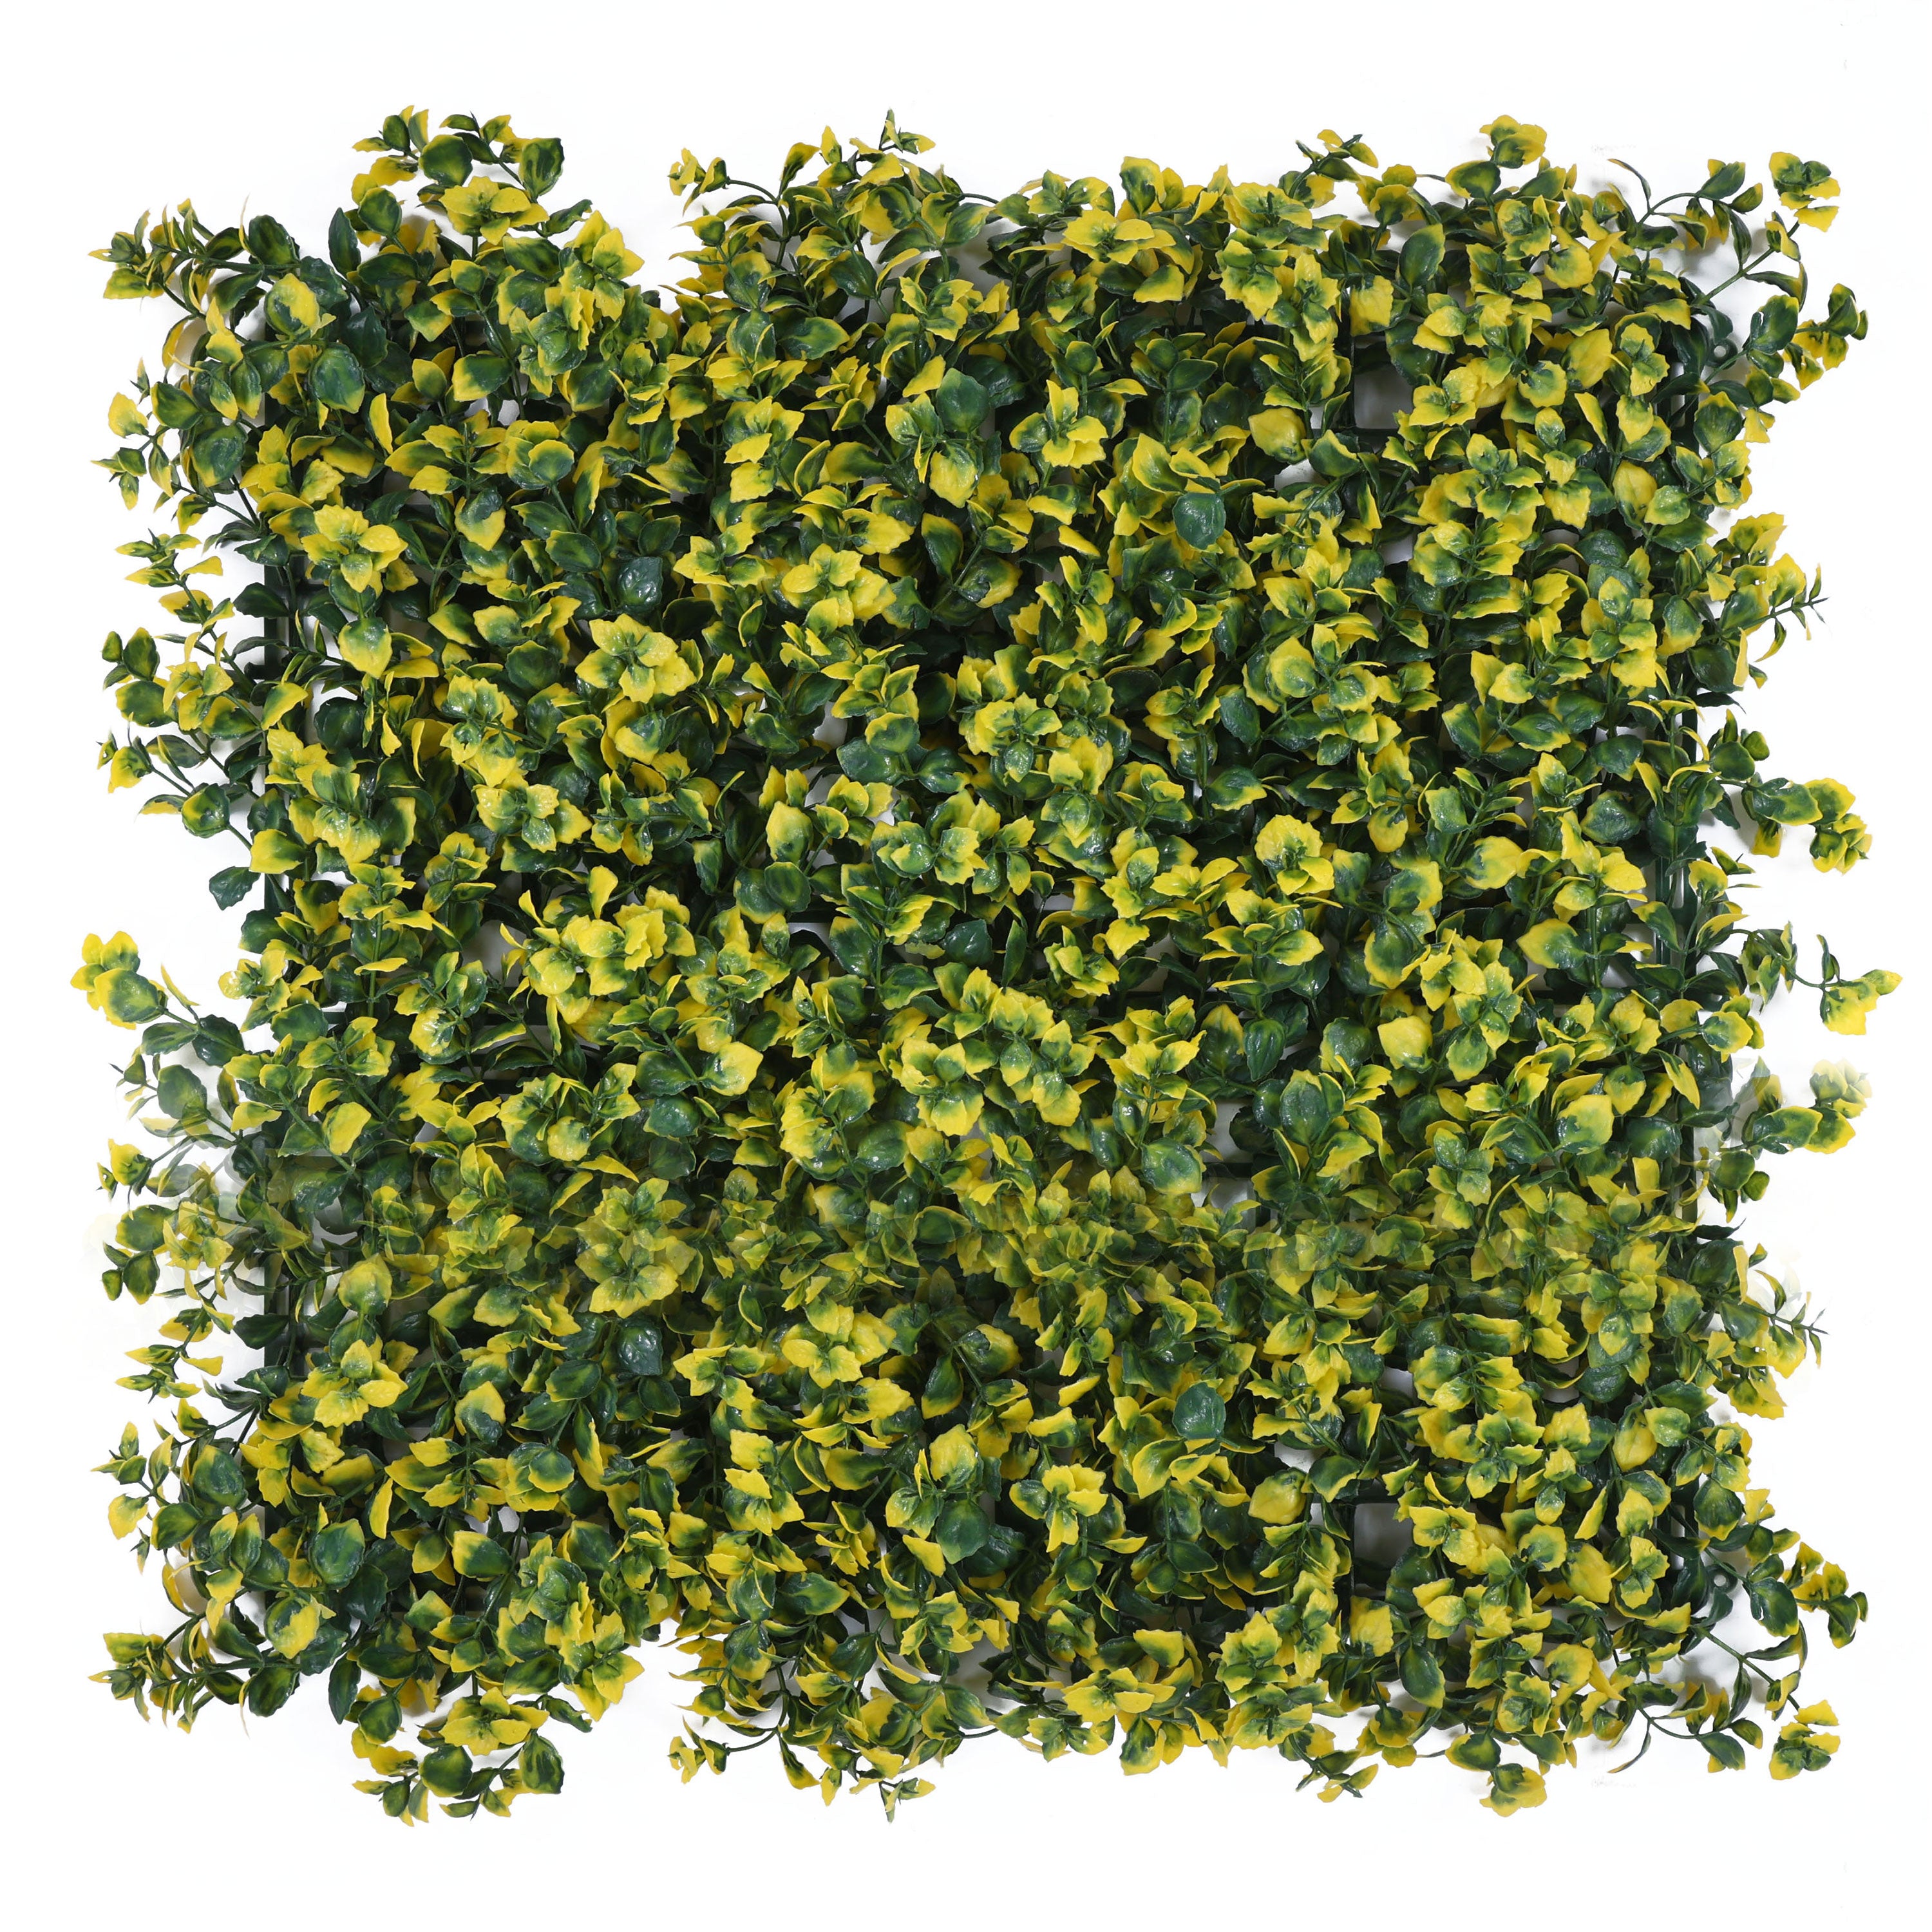 Yellow and Green Mix Shade Leaves Vertical Garden Wall Tile (Size: 50cm x 50cm, Pack of 1)